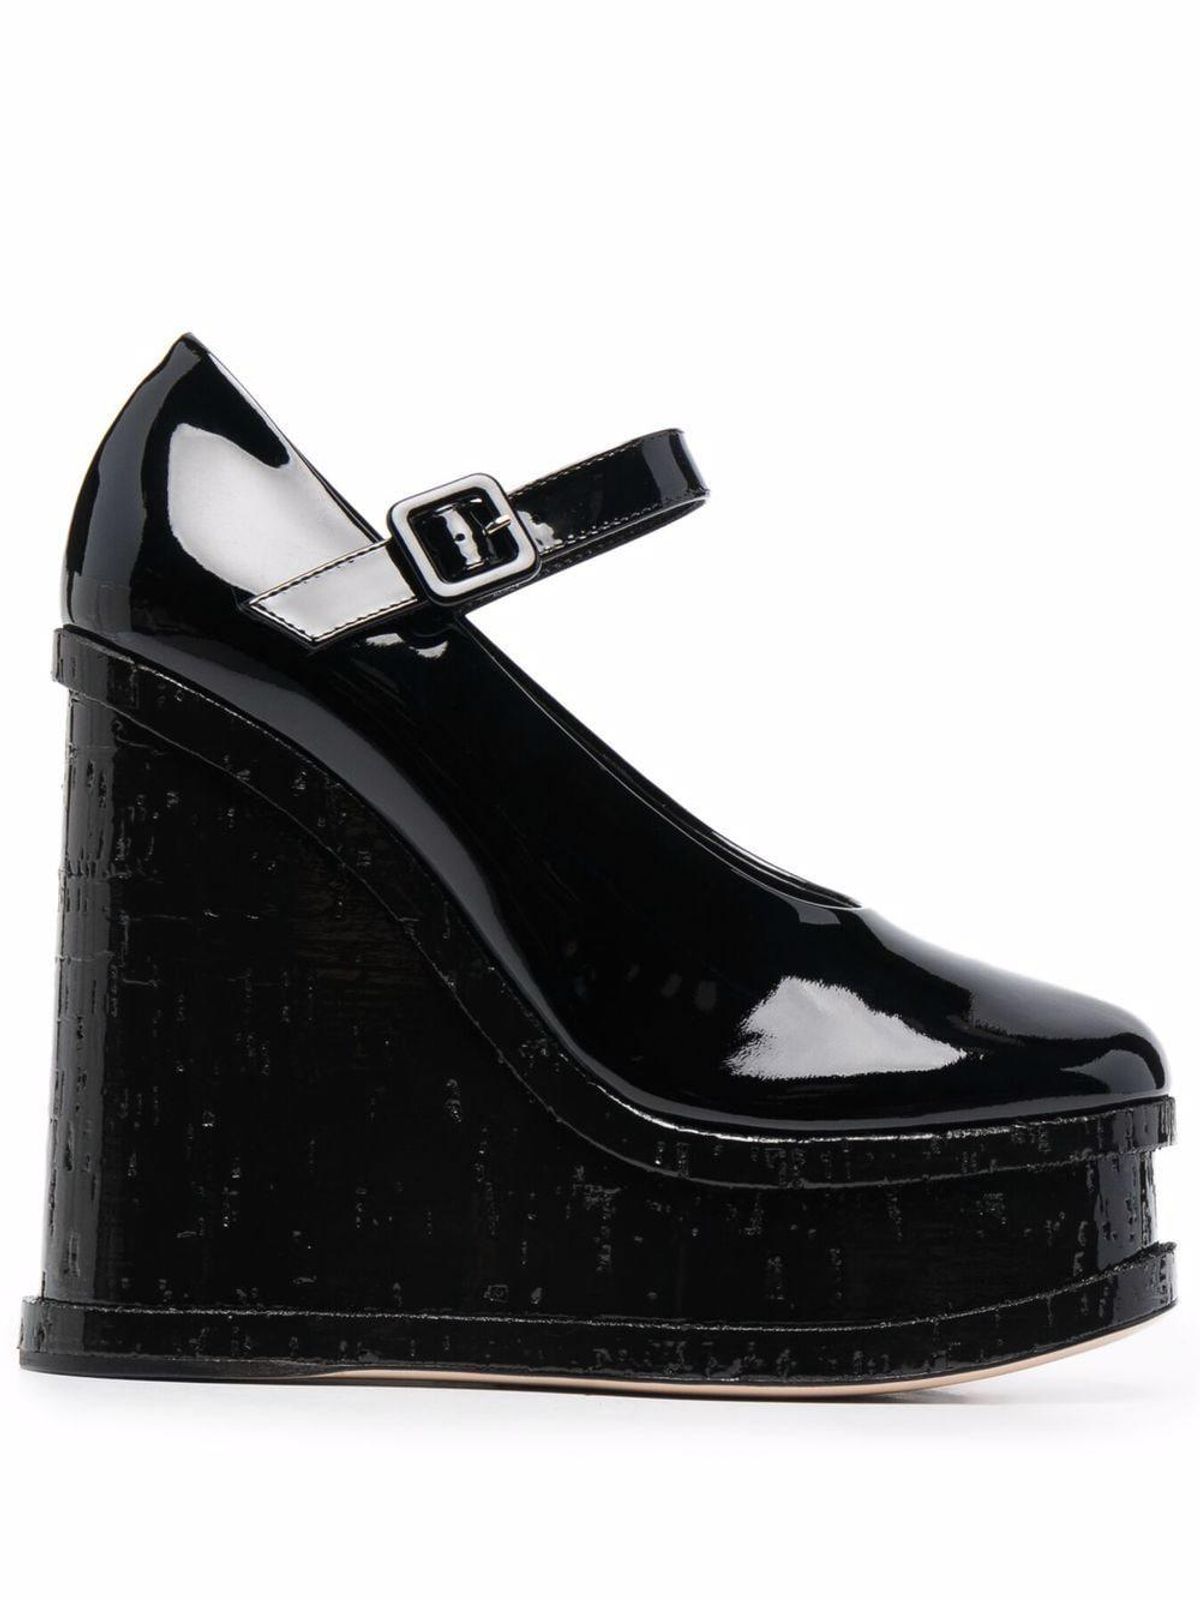 haus of honey 130mm patent leather wedge pumps